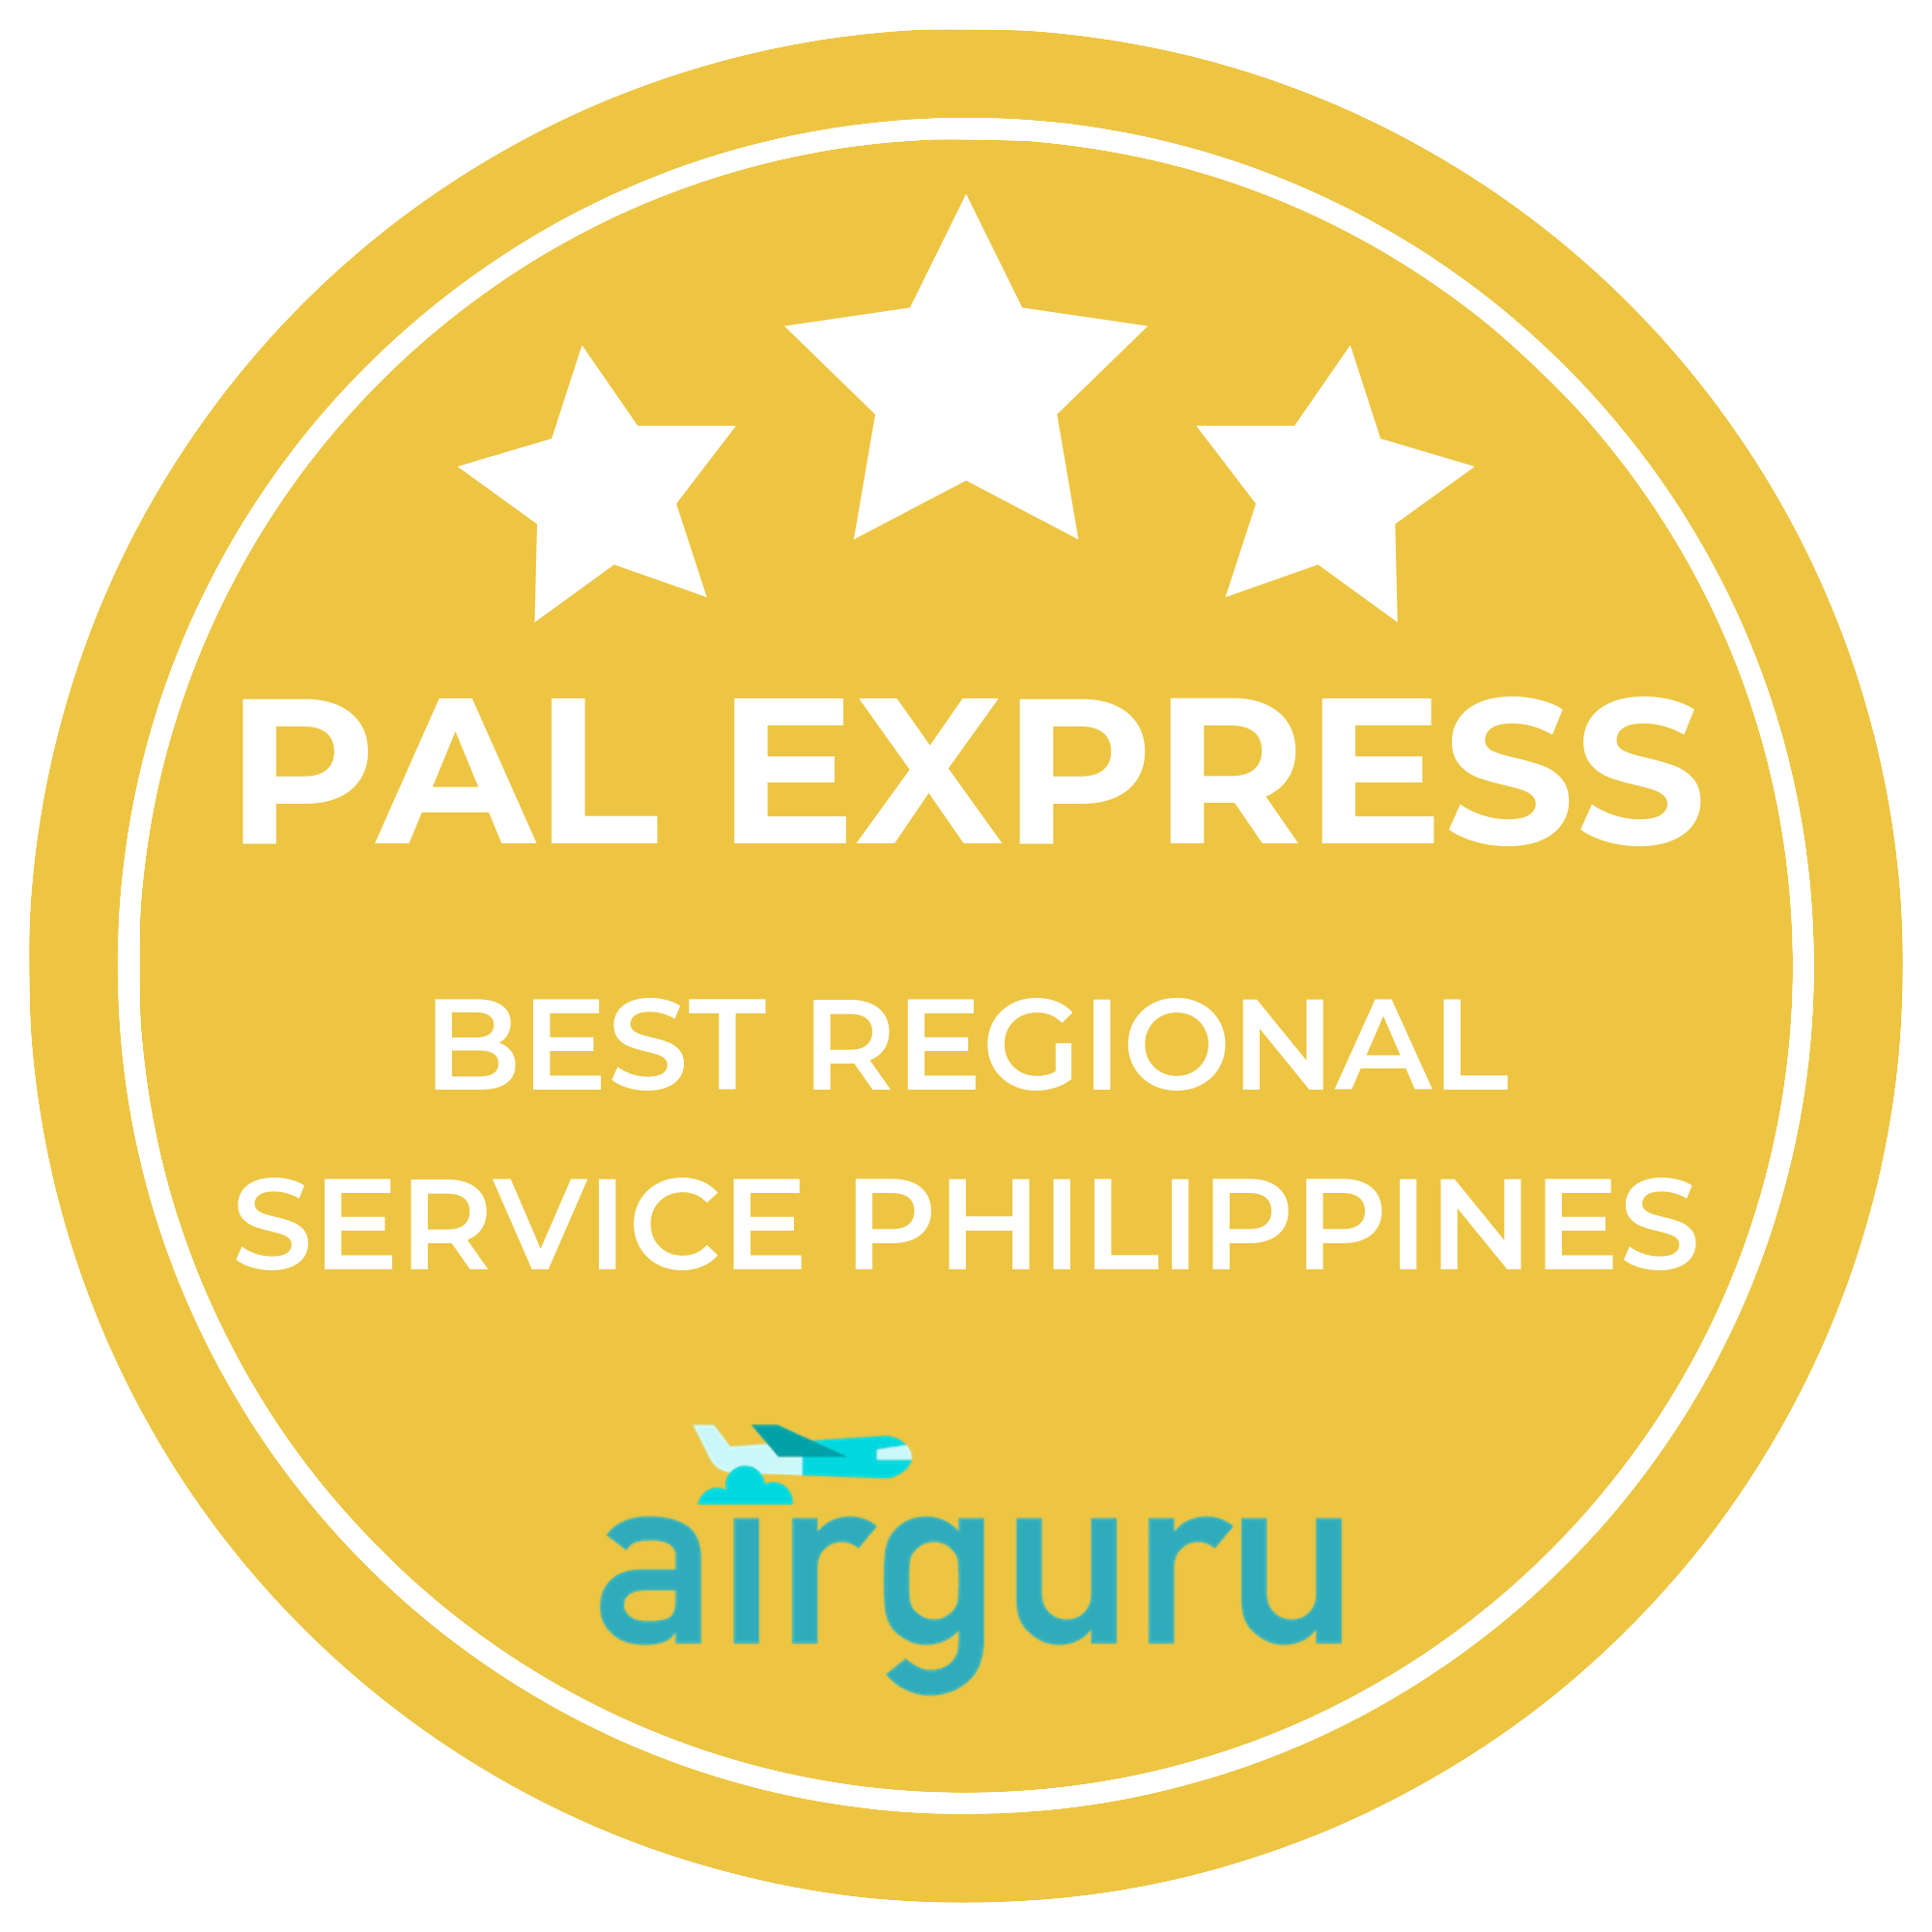 PAL Express - Best regional service on the Philippines